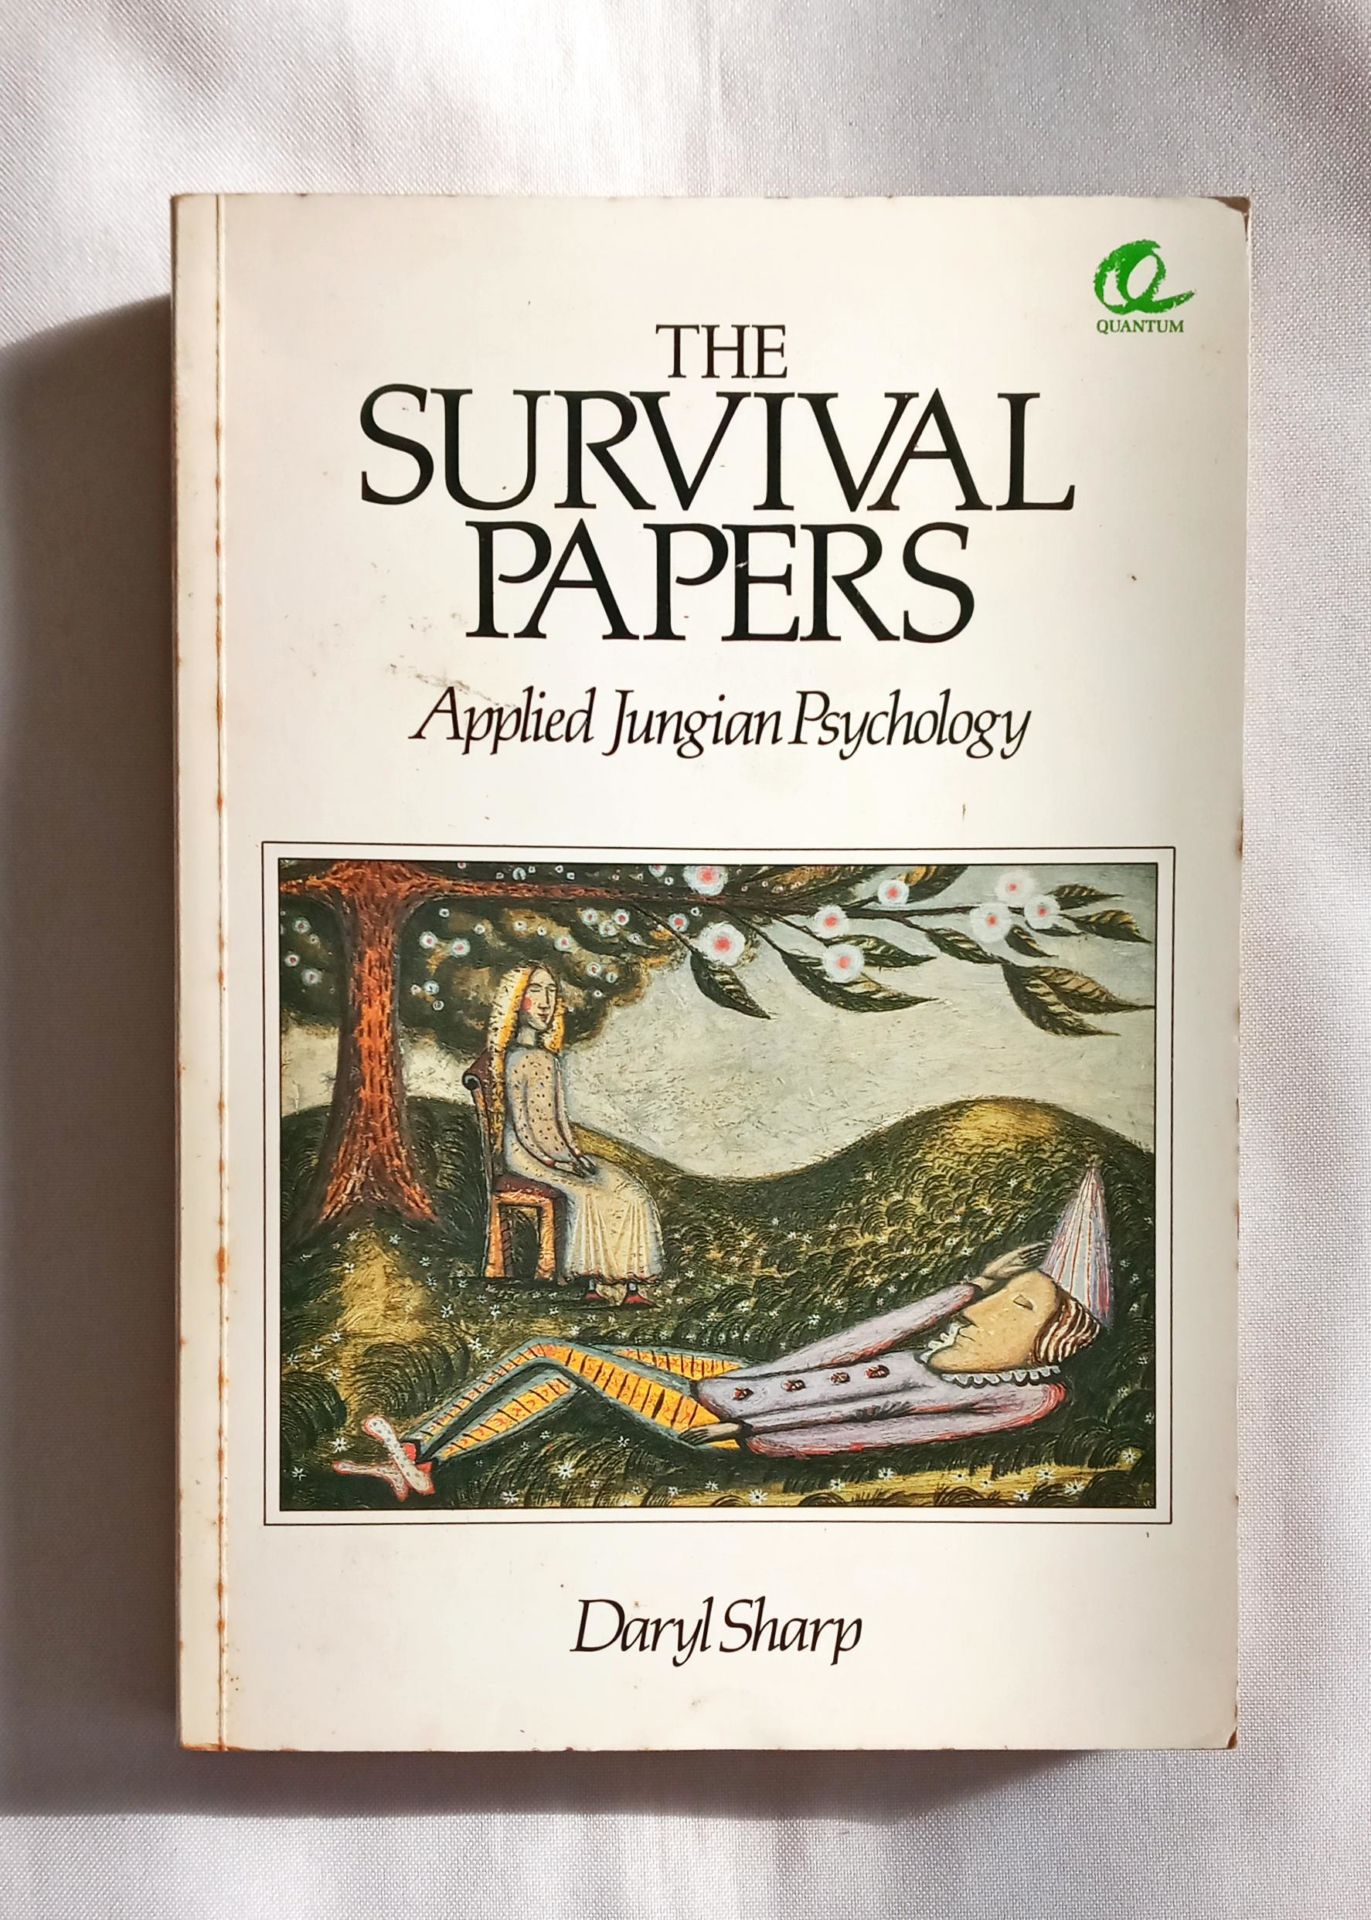 <a href="https://www.touchelivros.com.br/livro/the-survival-papers-applied-jungian-psychology/">The Survival Papers: Applied Jungian Psychology - Daryl Sharp</a>